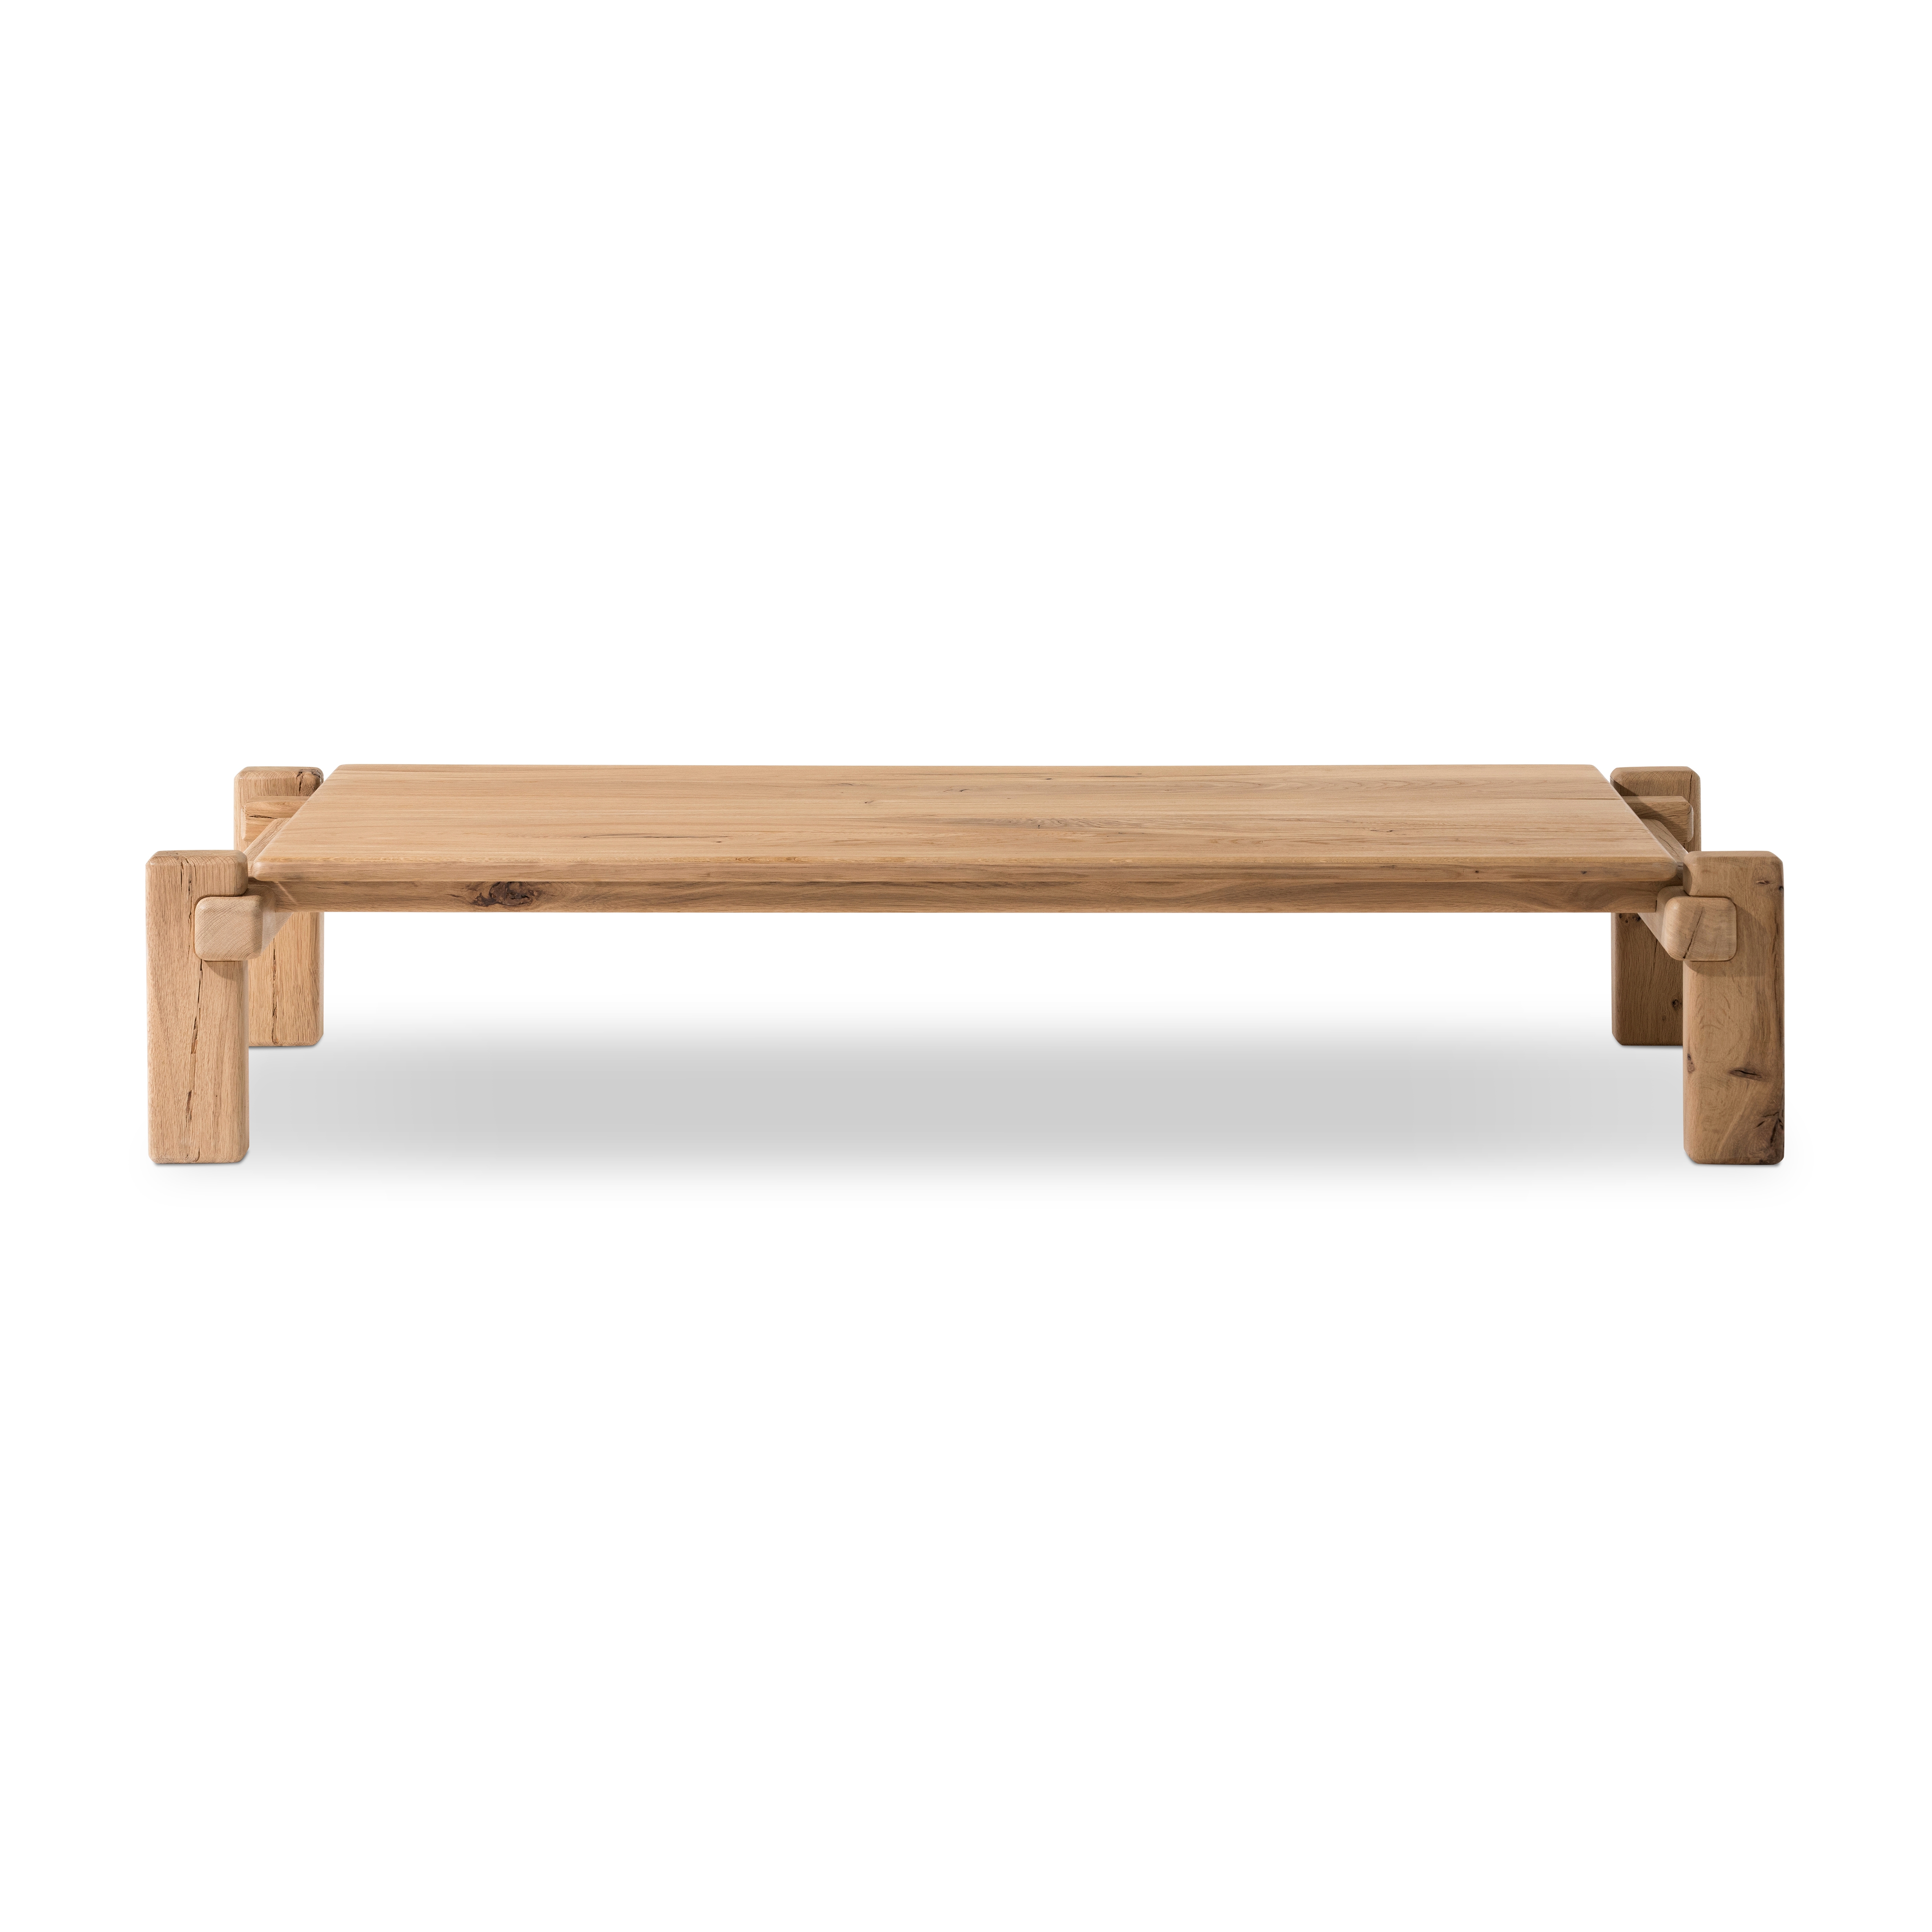 Marcia Large Coffee Table-French Oak - Image 3